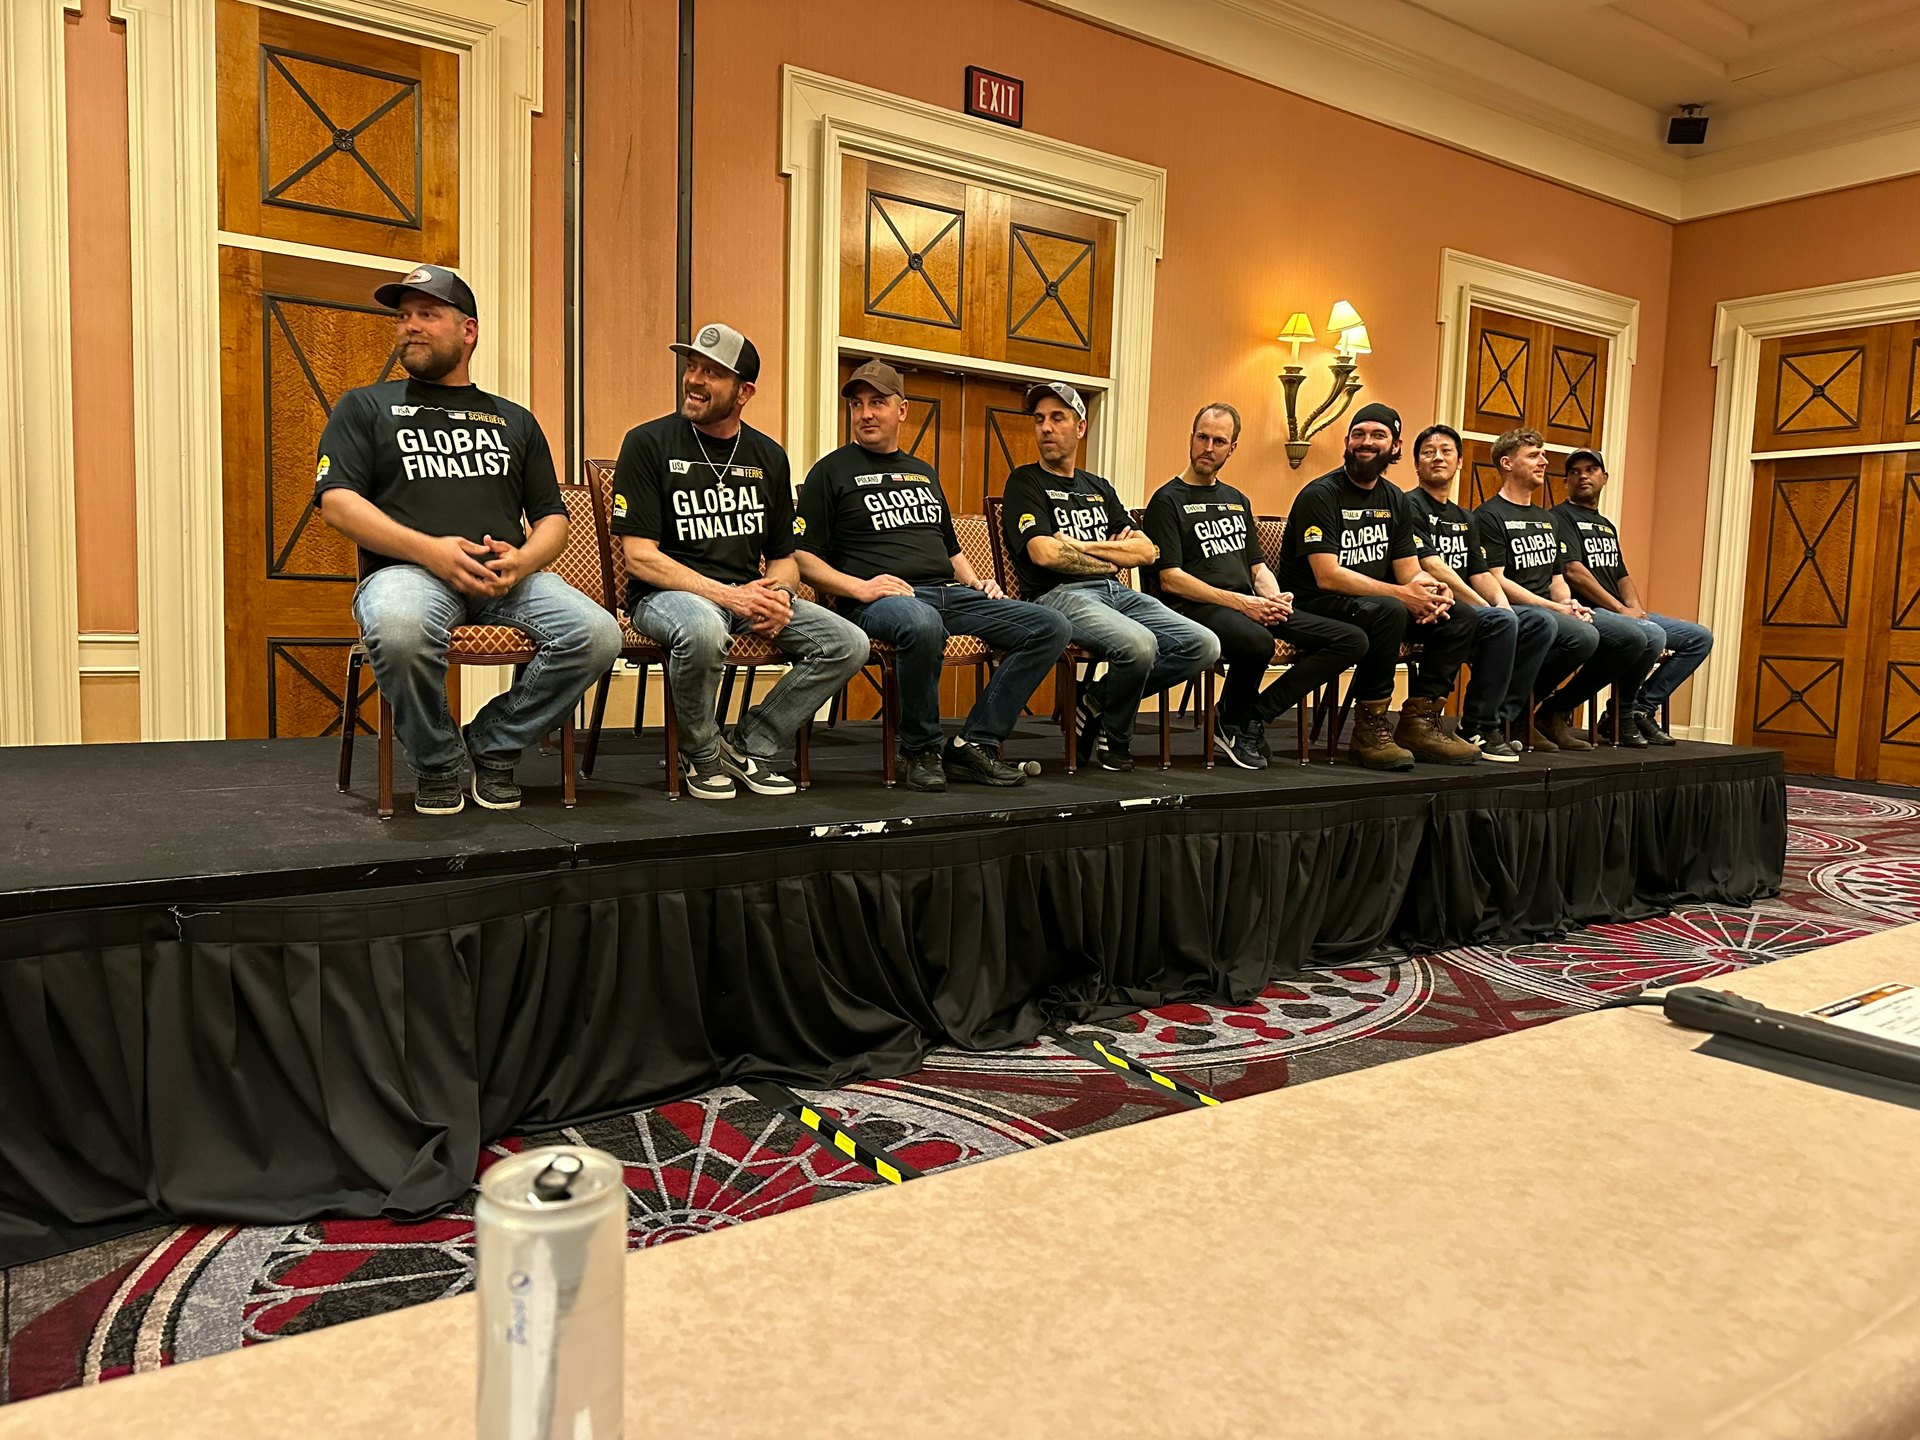 The nine Caterpillar Global Operator Challenge finalists answered questions and anticipated the final competition at CONEXPO 2023 on Sunday, March 12.